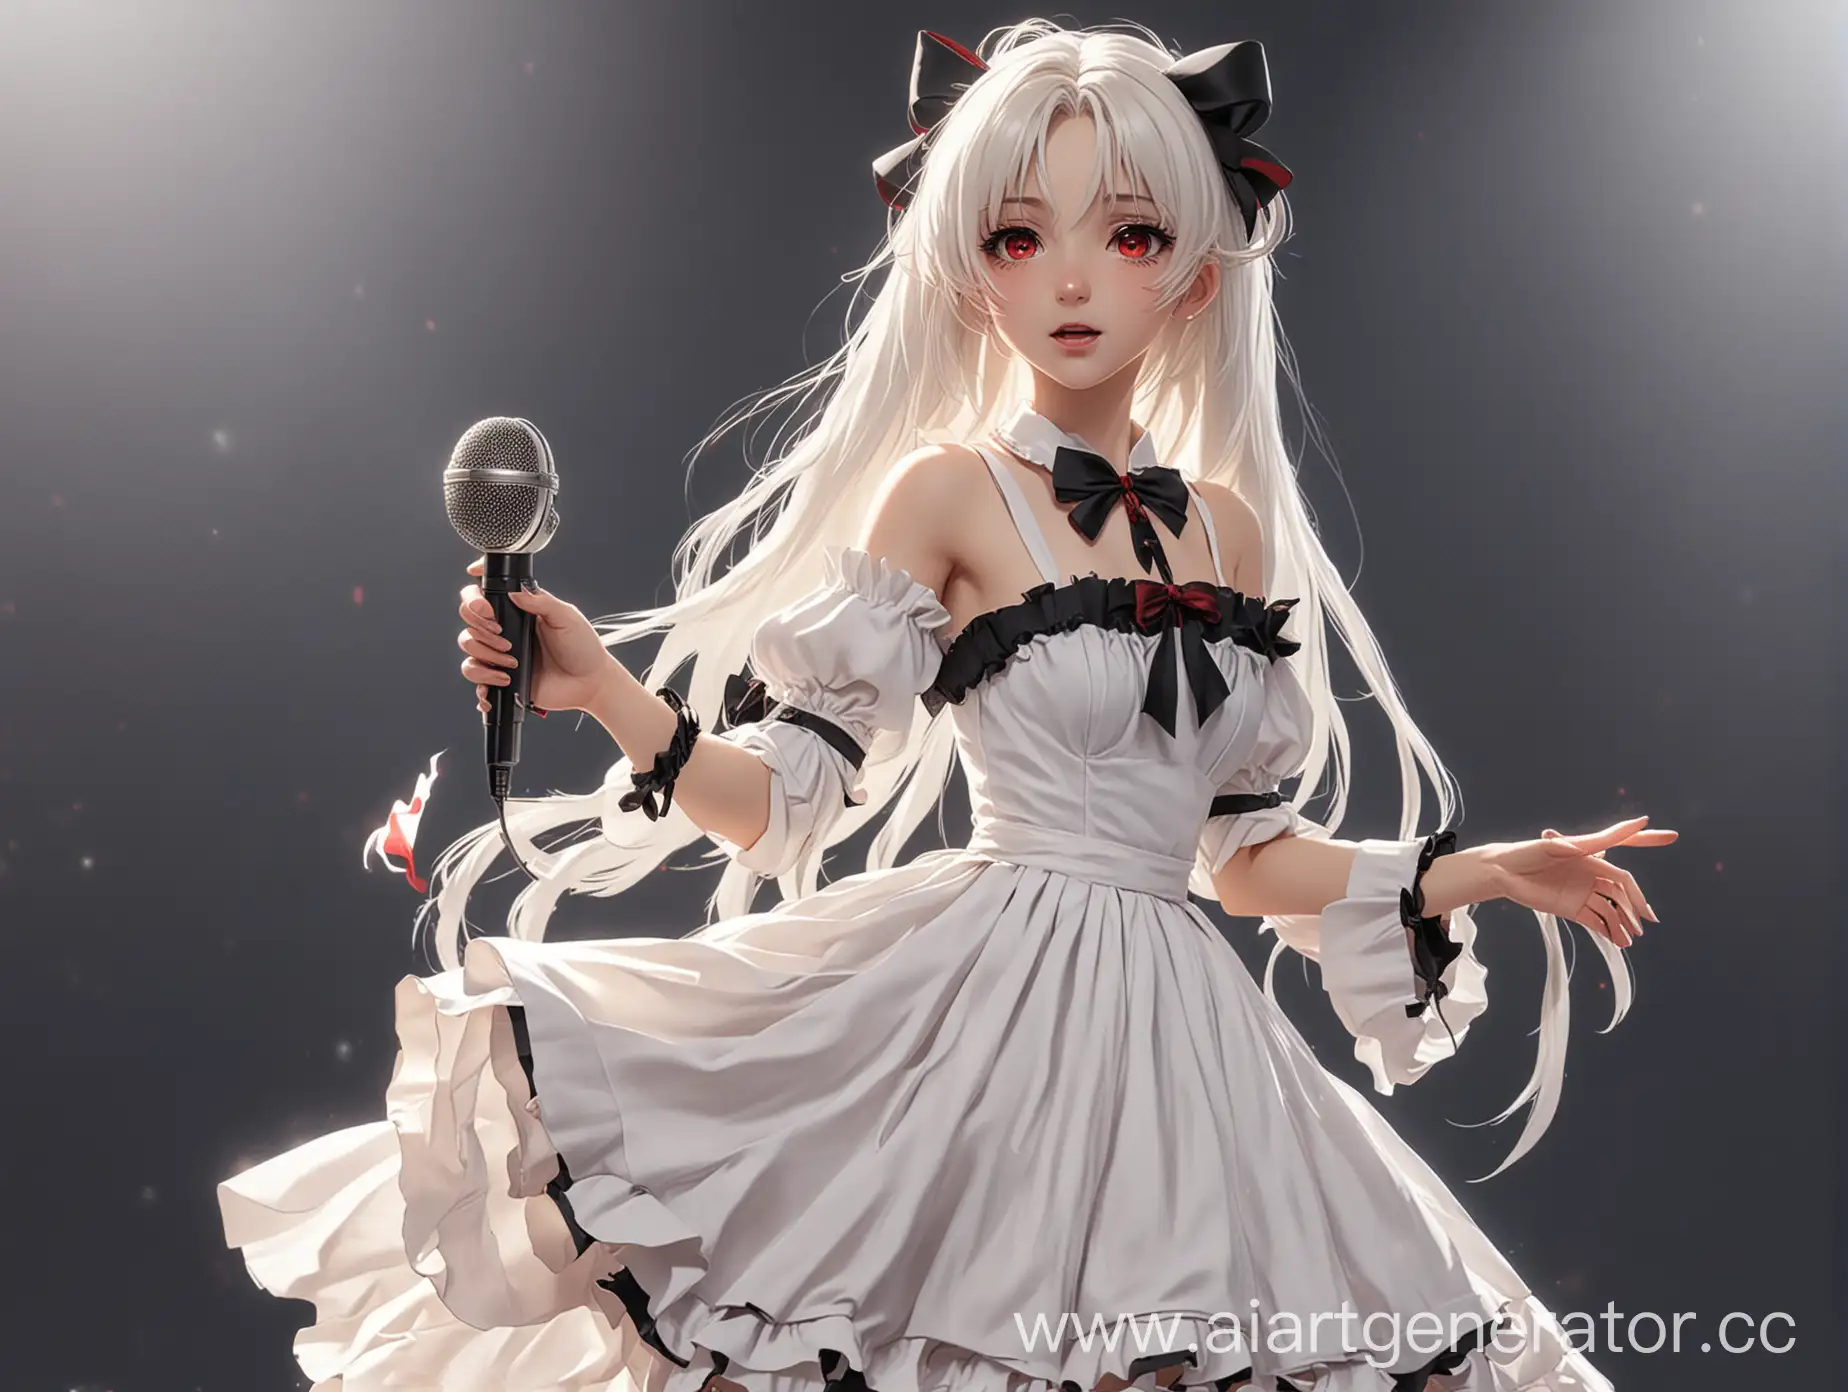 Anime-Girl-with-White-Long-Hair-Singing-with-Microphone